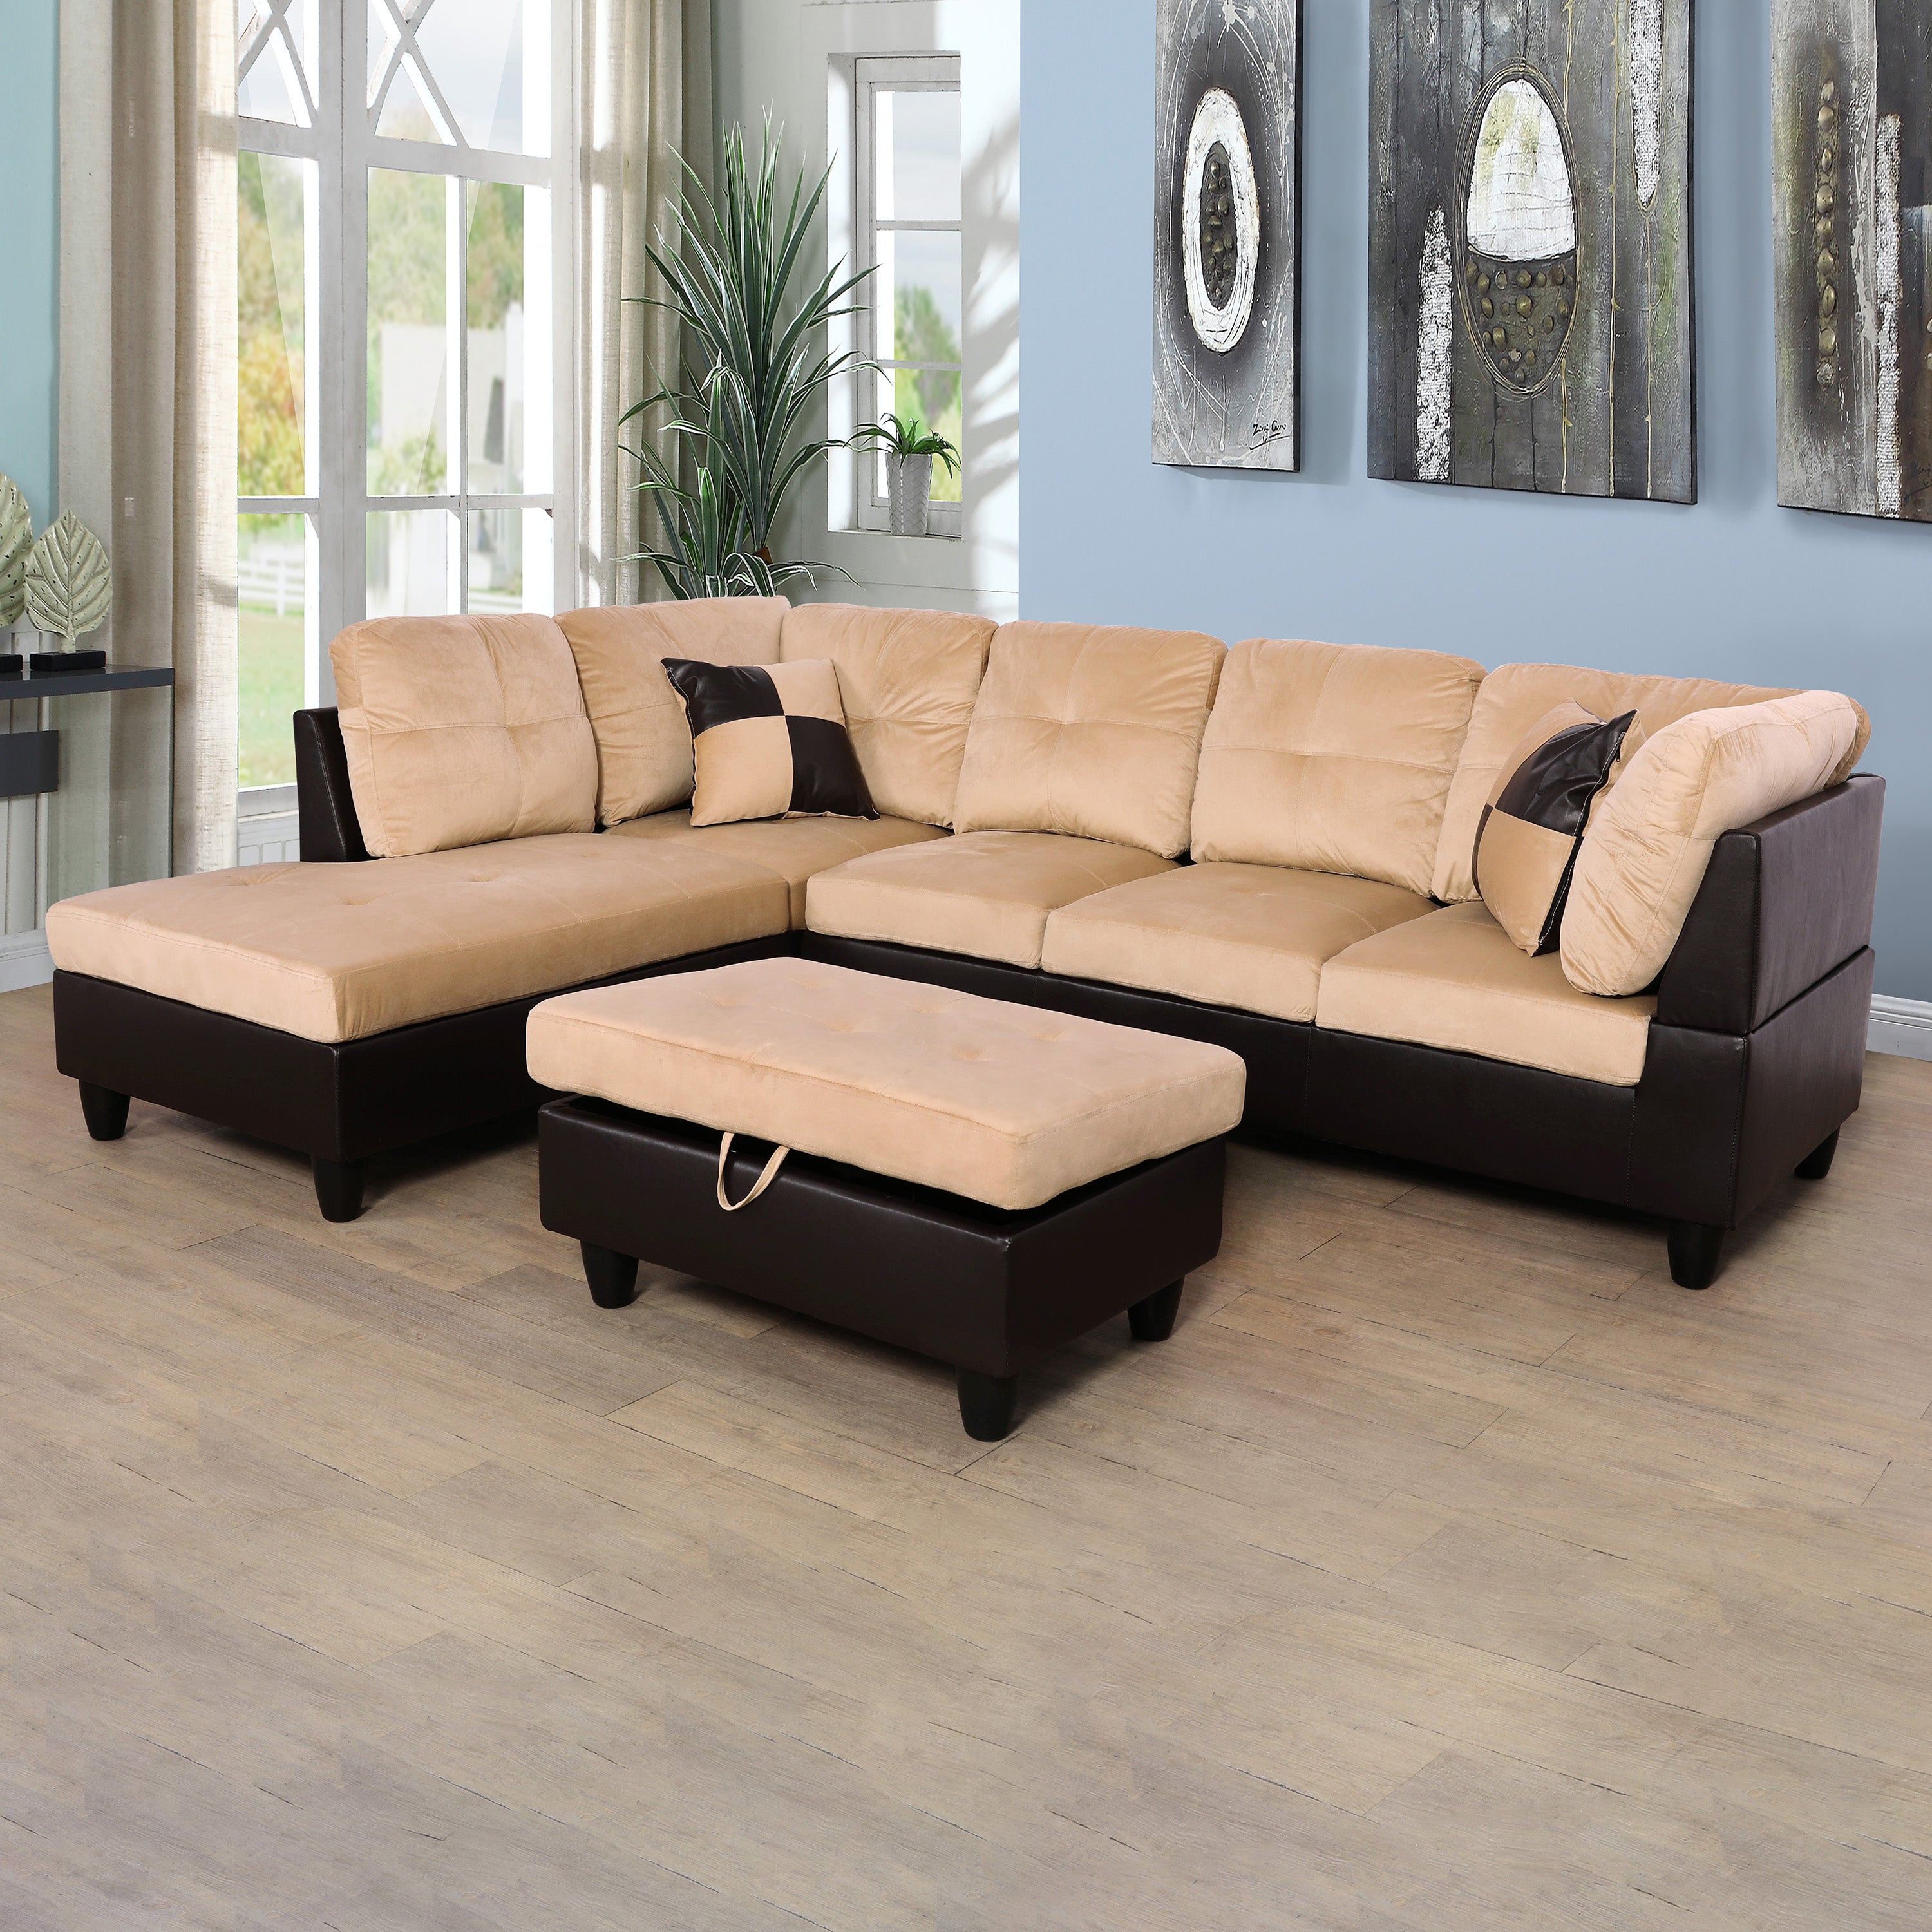 Ainehome Beige and Brown Color Lint And PVC 3-Piece Couch Living Room Sofa Set